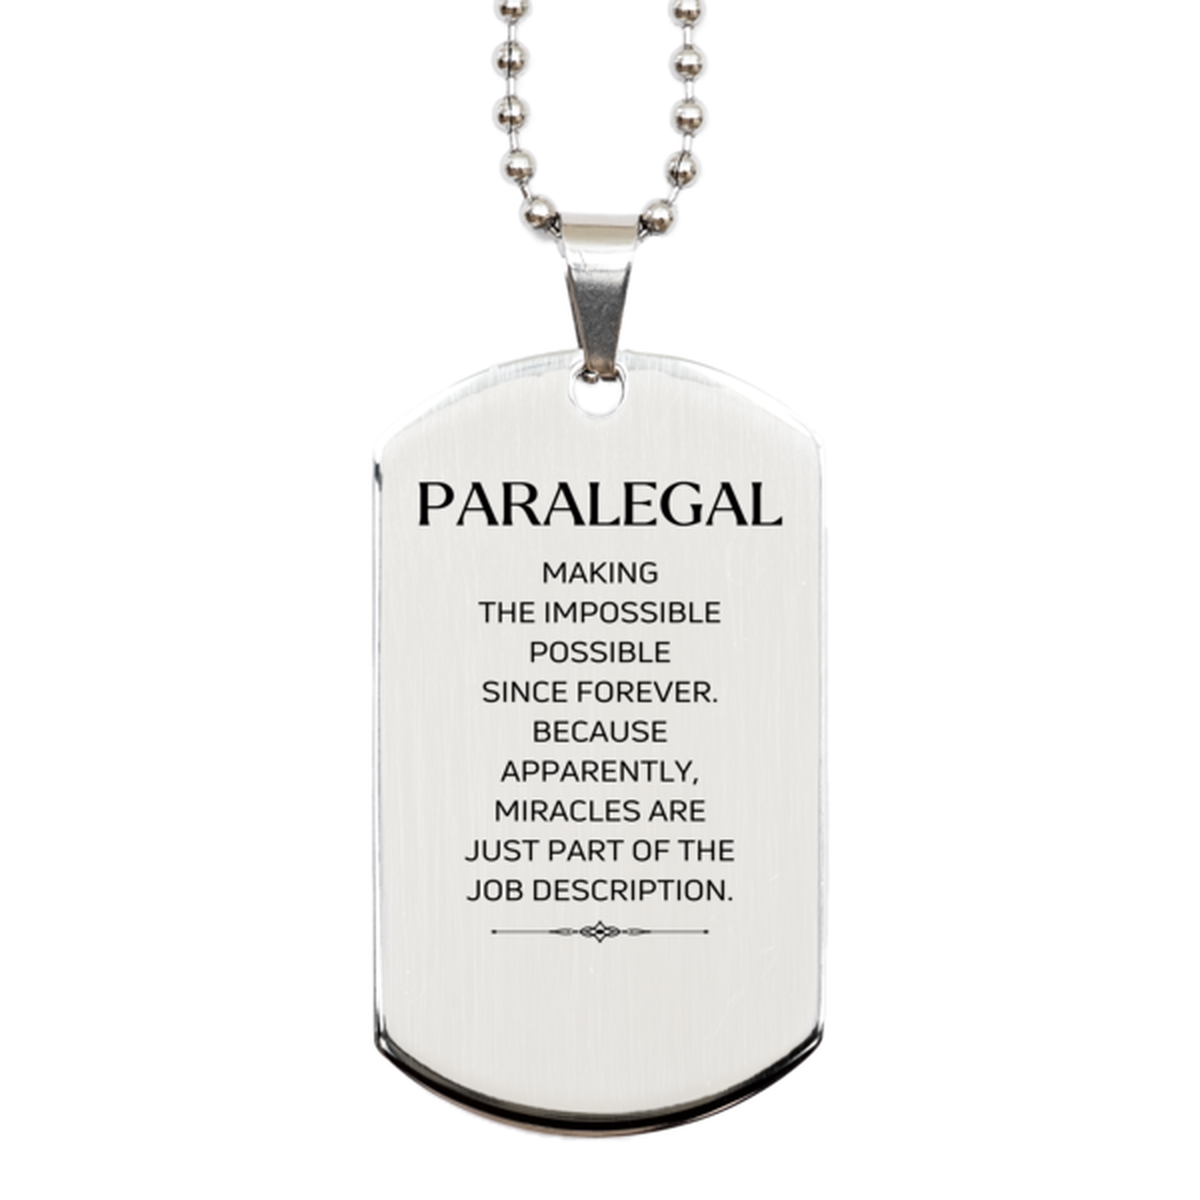 Funny Paralegal Gifts, Miracles are just part of the job description, Inspirational Birthday Silver Dog Tag For Paralegal, Men, Women, Coworkers, Friends, Boss